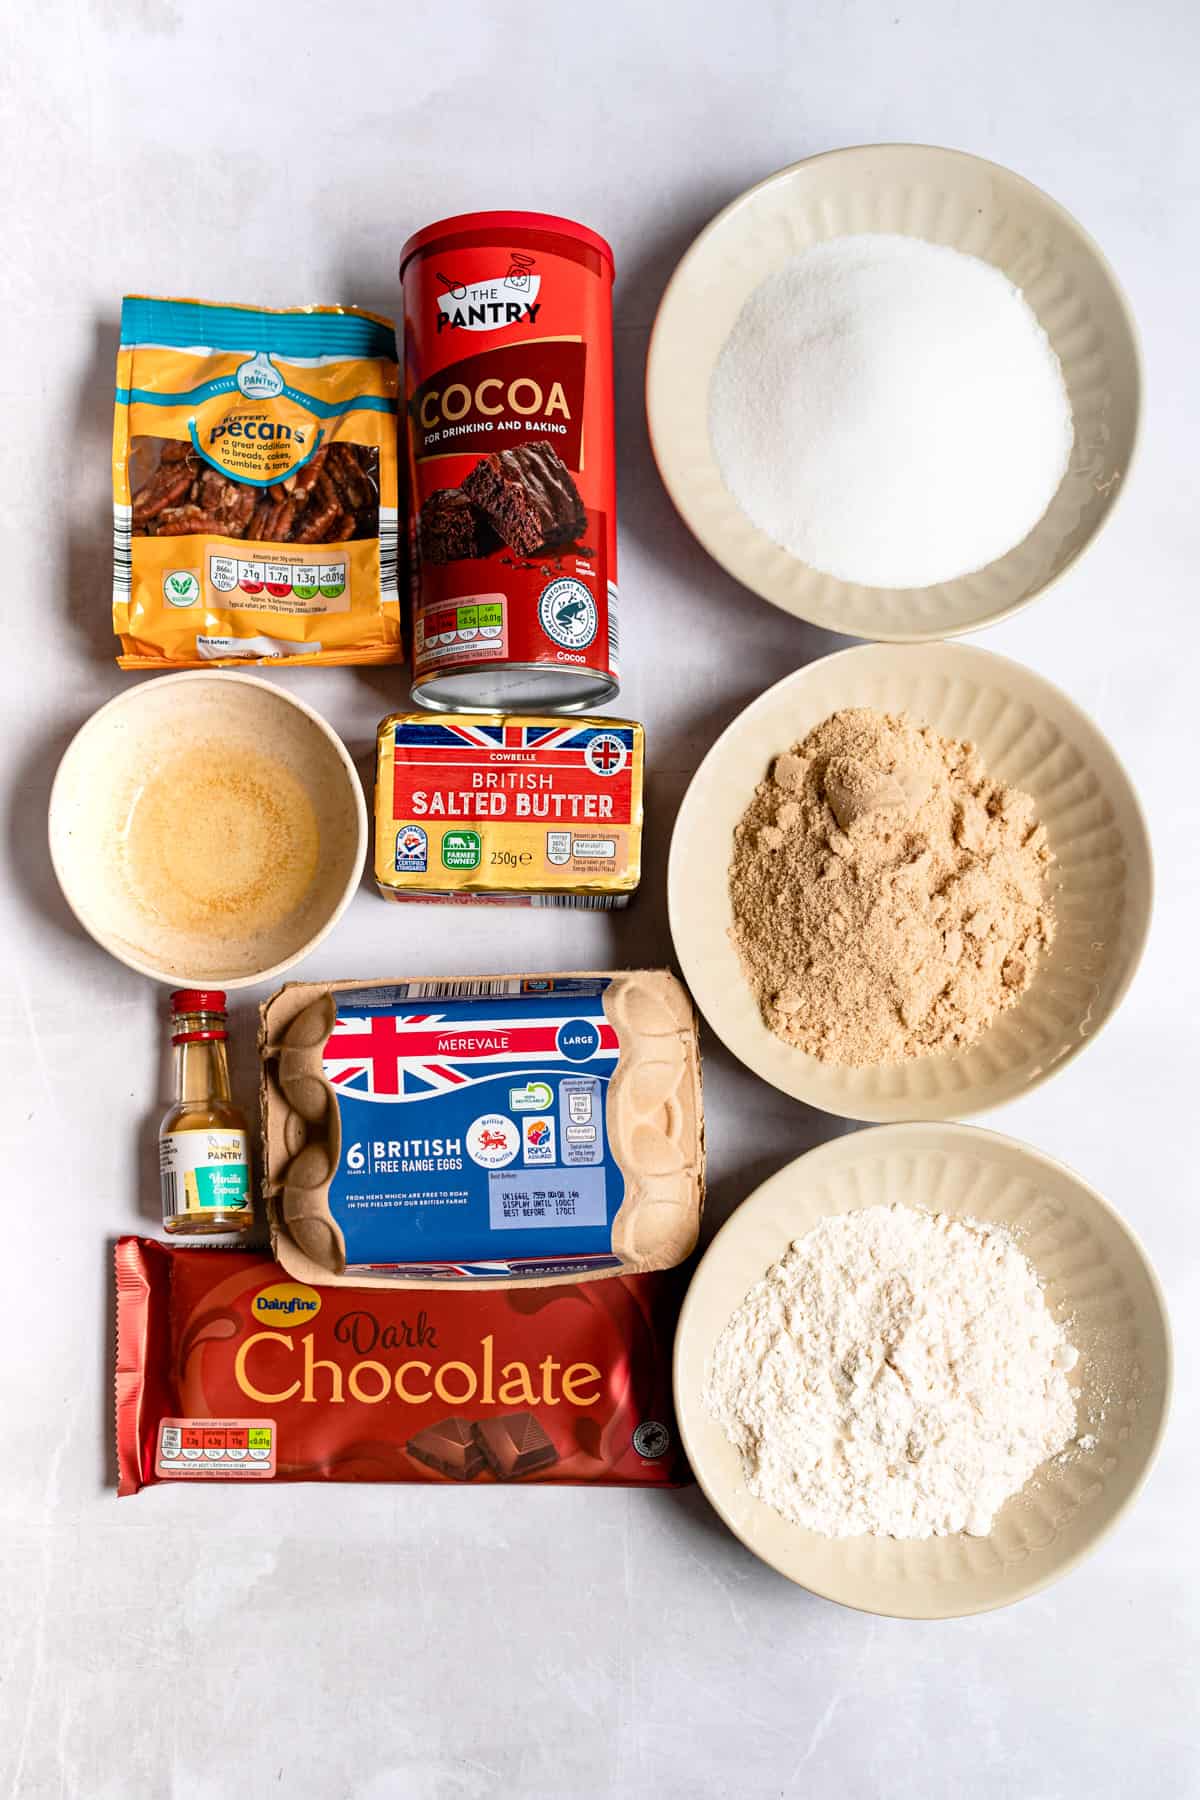 Aldi ingredients for brownies laid out on a baking tray.